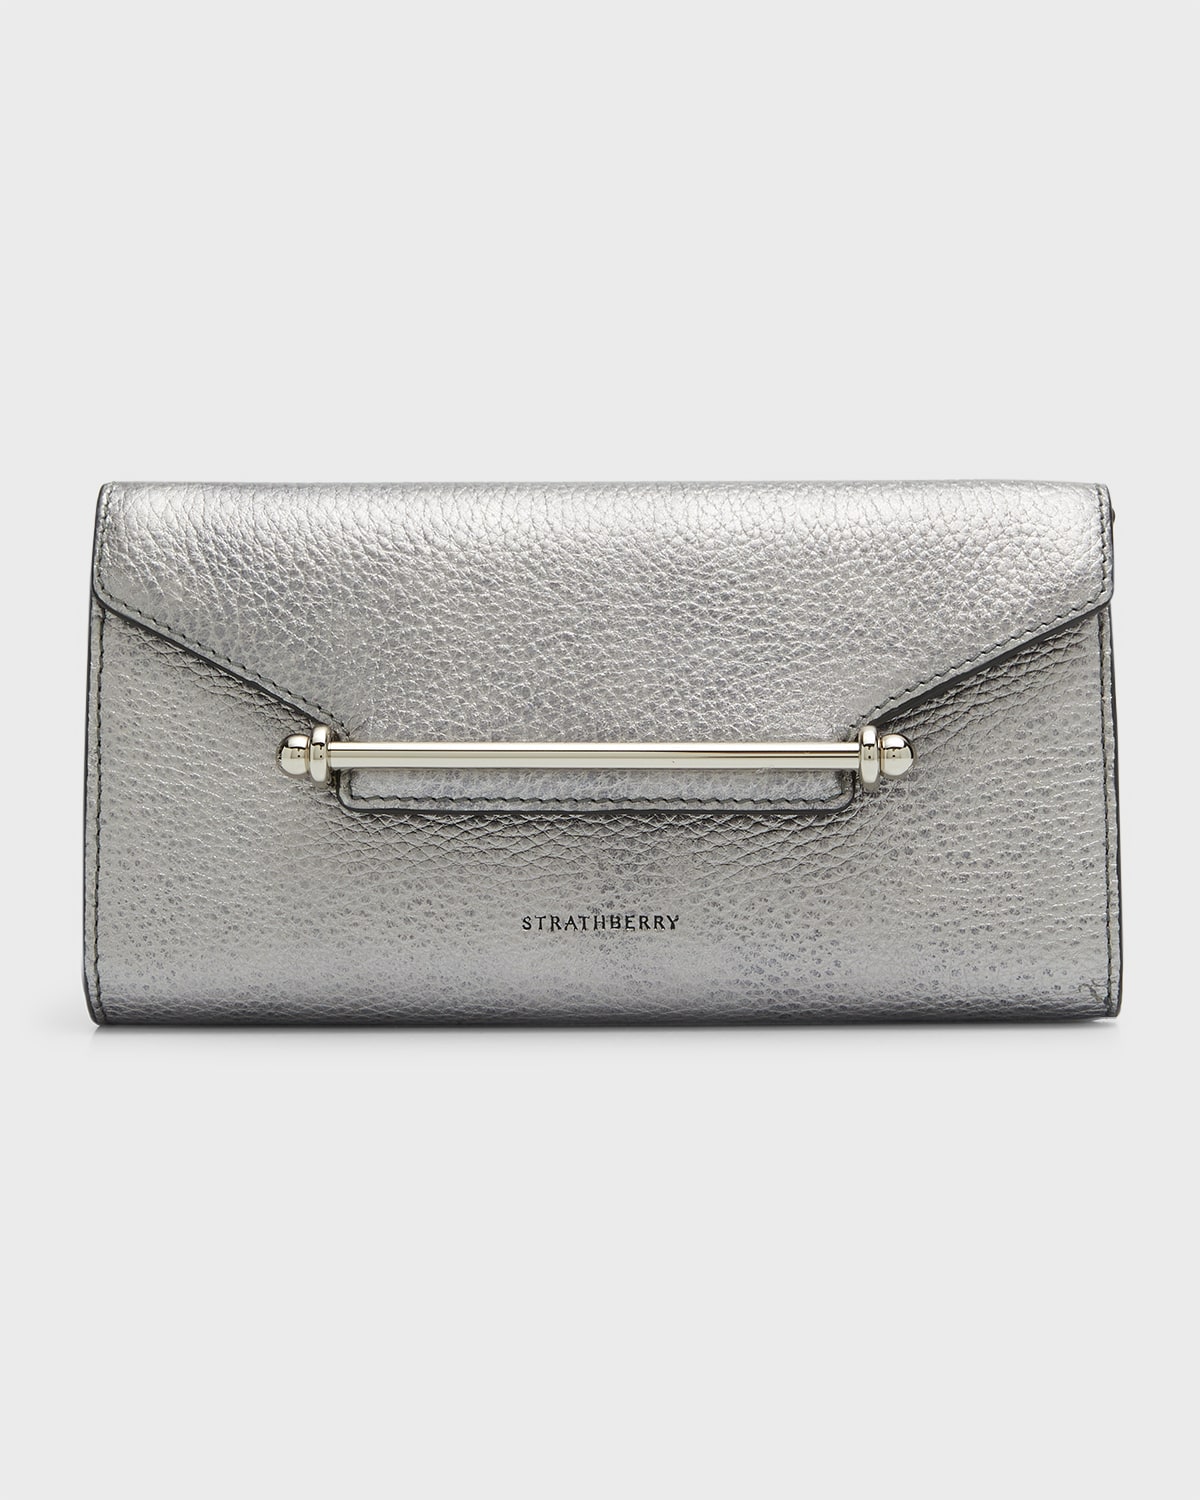 STRATHBERRY Multrees Croc-Embossed Flap Wallet on Chain | Neiman Marcus